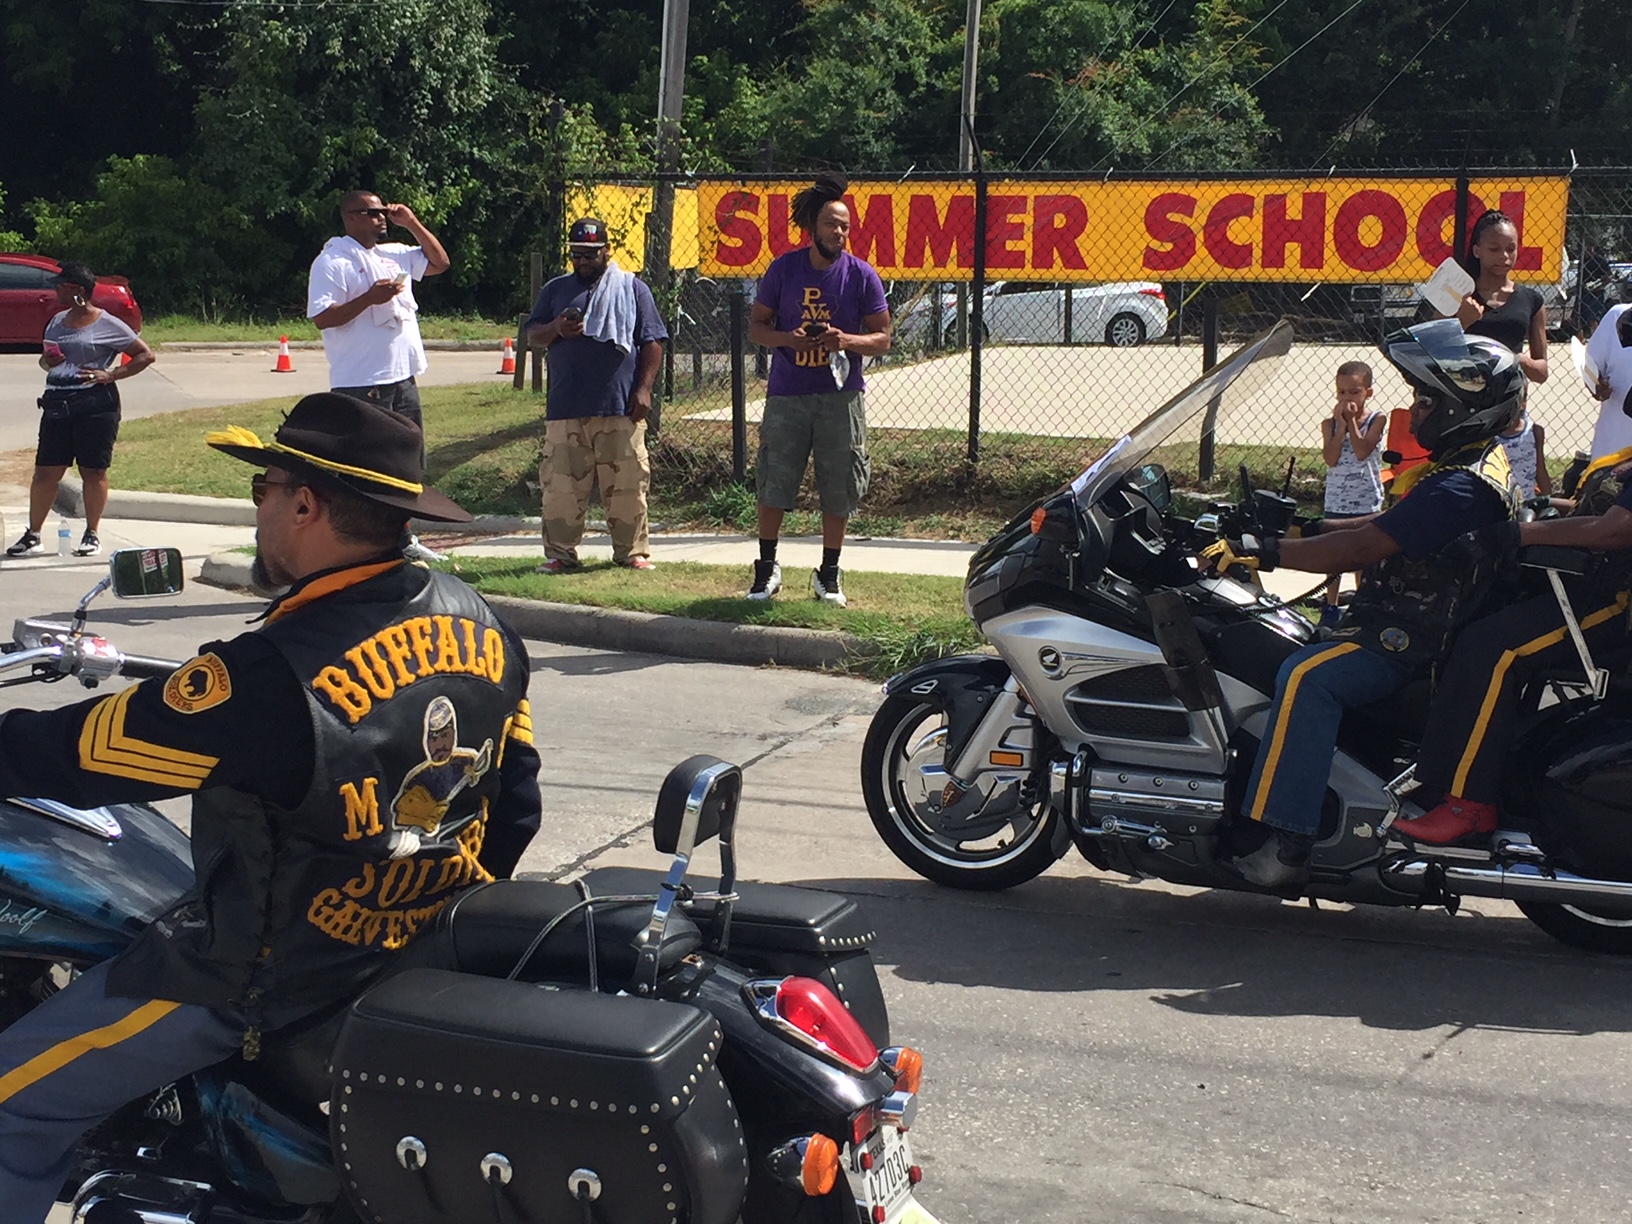 Buffalo Soldiers ride on motorcycles in the Juneteenth Parade